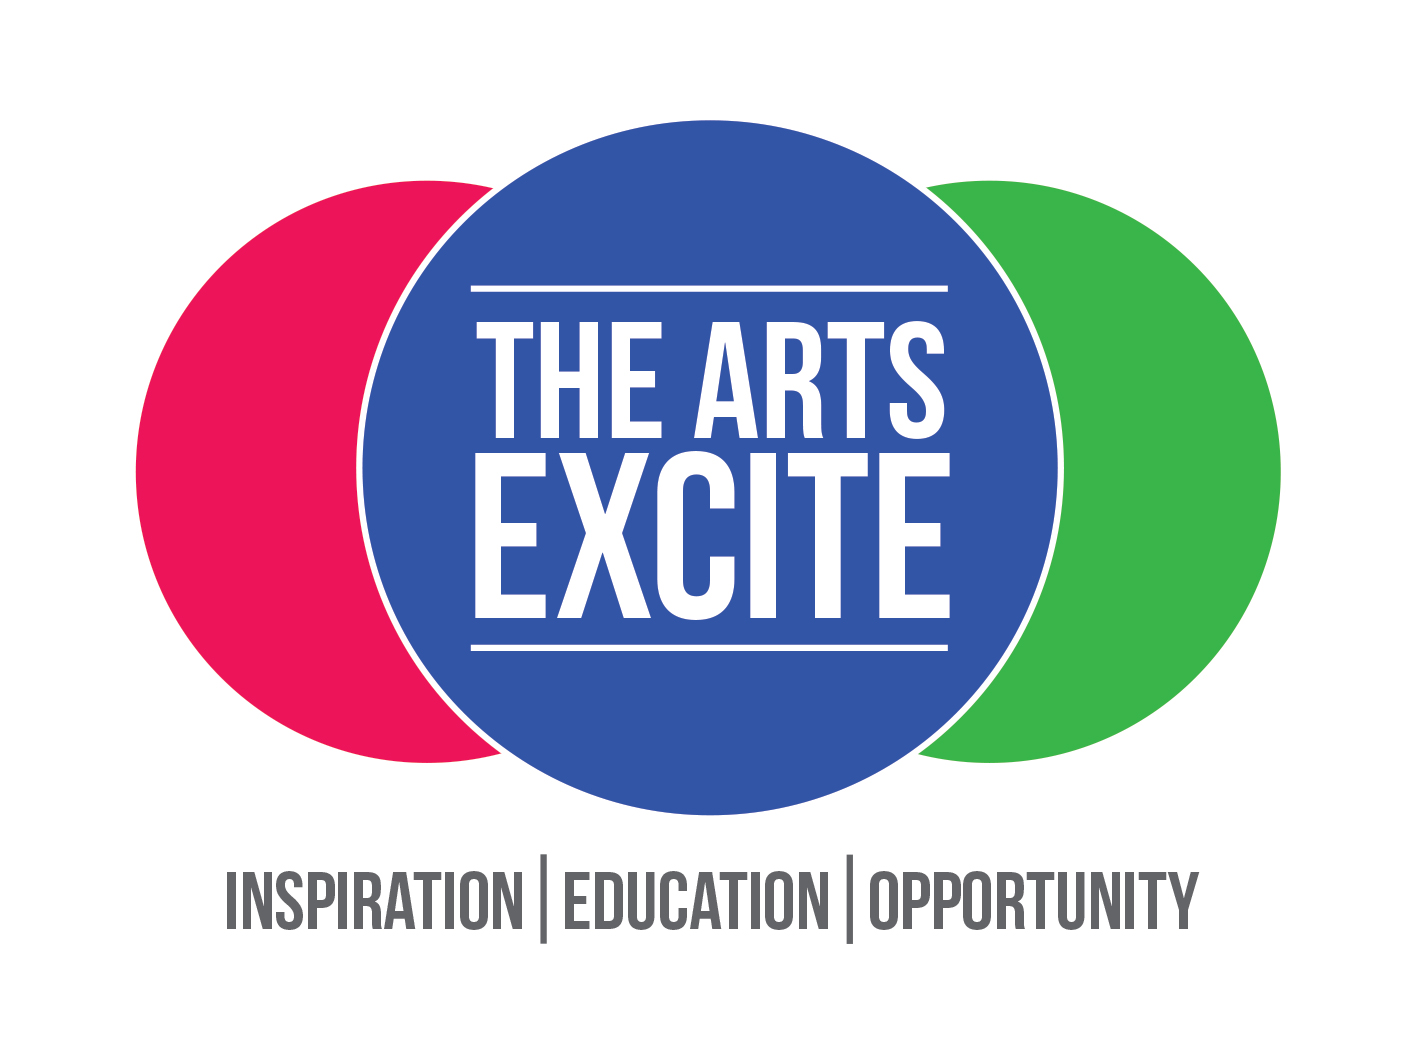 The Arts Excite CIC